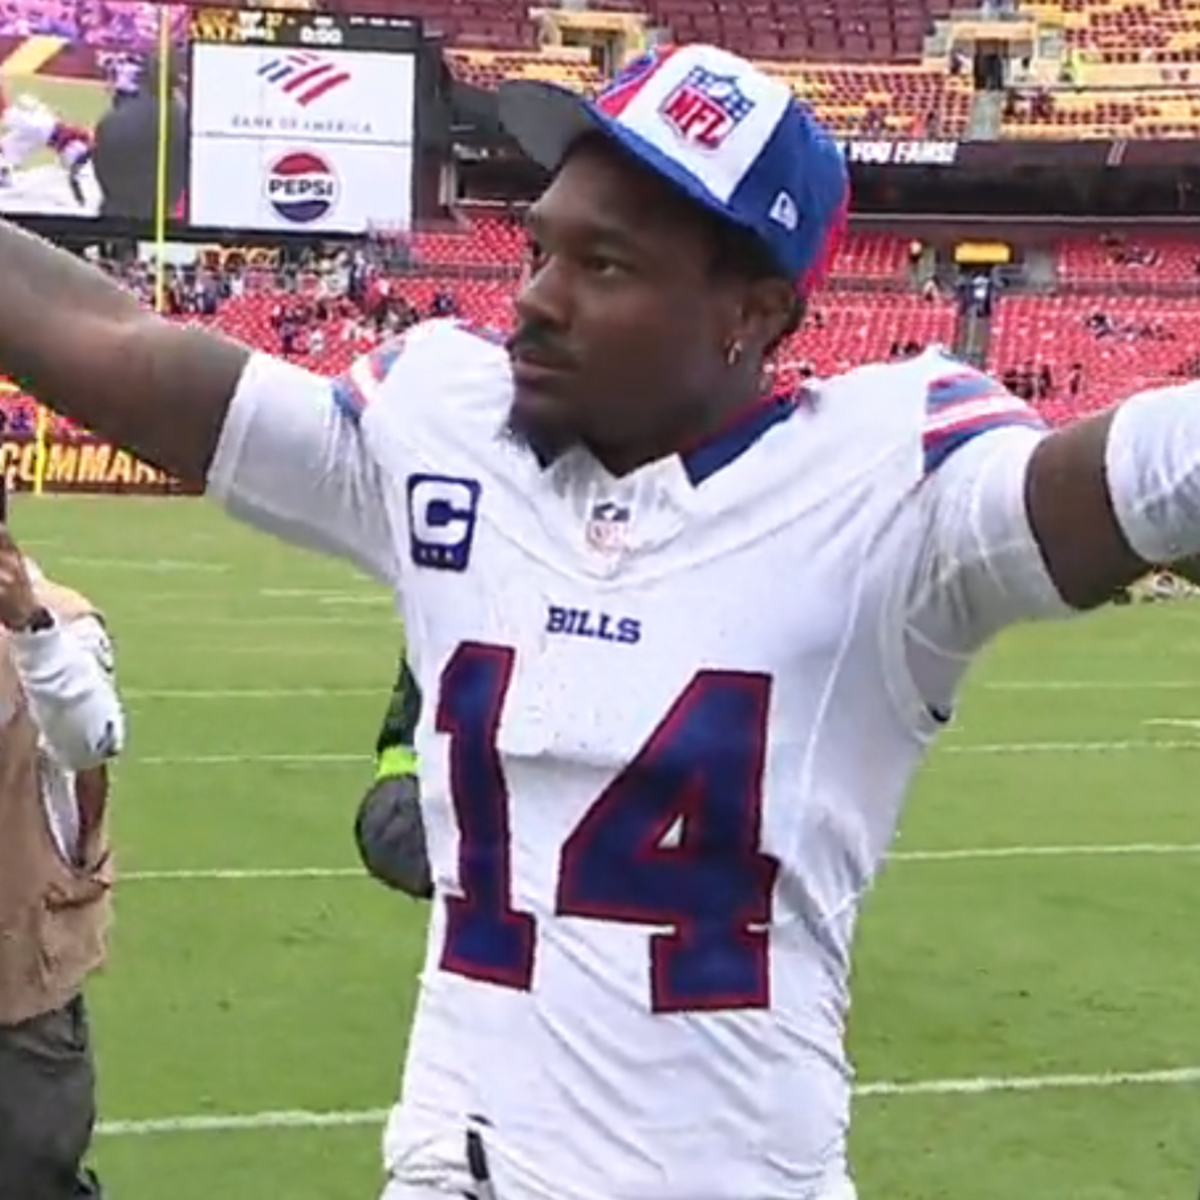 Stefon Diggs honors Bills Mafia with table catch at Pro Bowl Skills Showdown